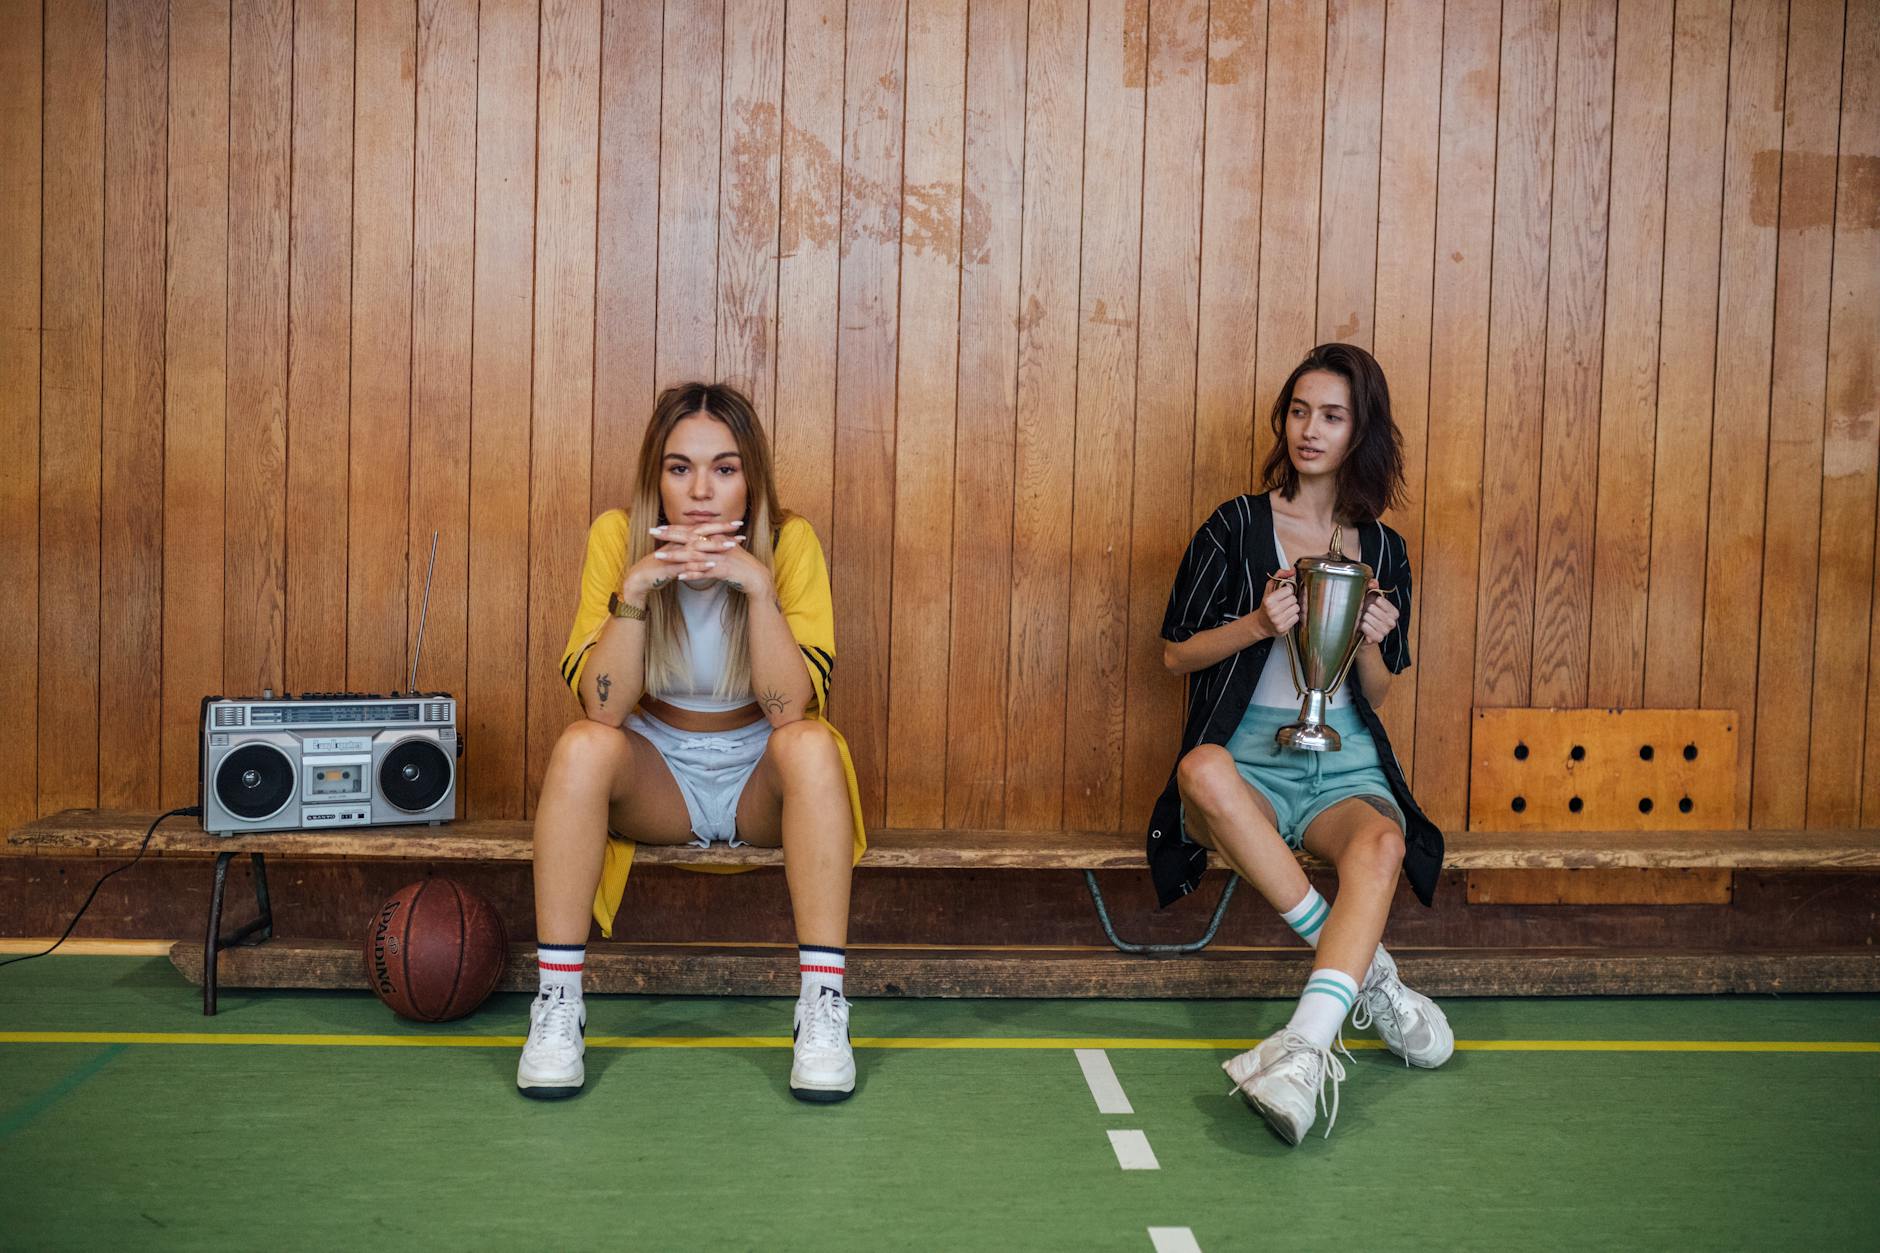 Two Women in Shorts and Long Shirts Sitting on a Bench at a Basketball Court